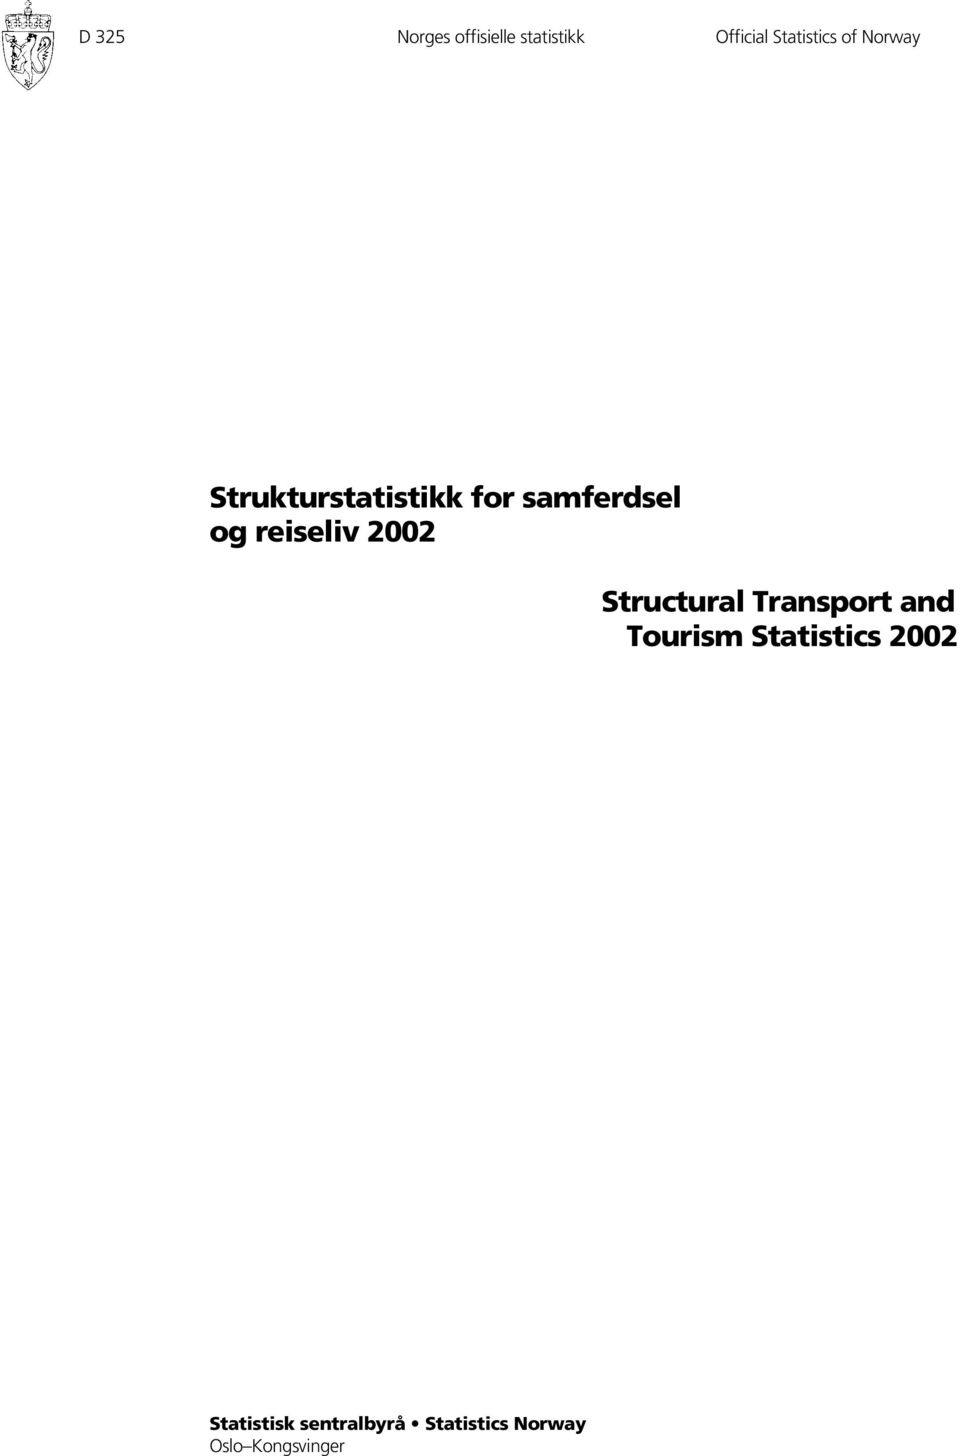 2002 Structural Transport and Tourism Statistics 2002